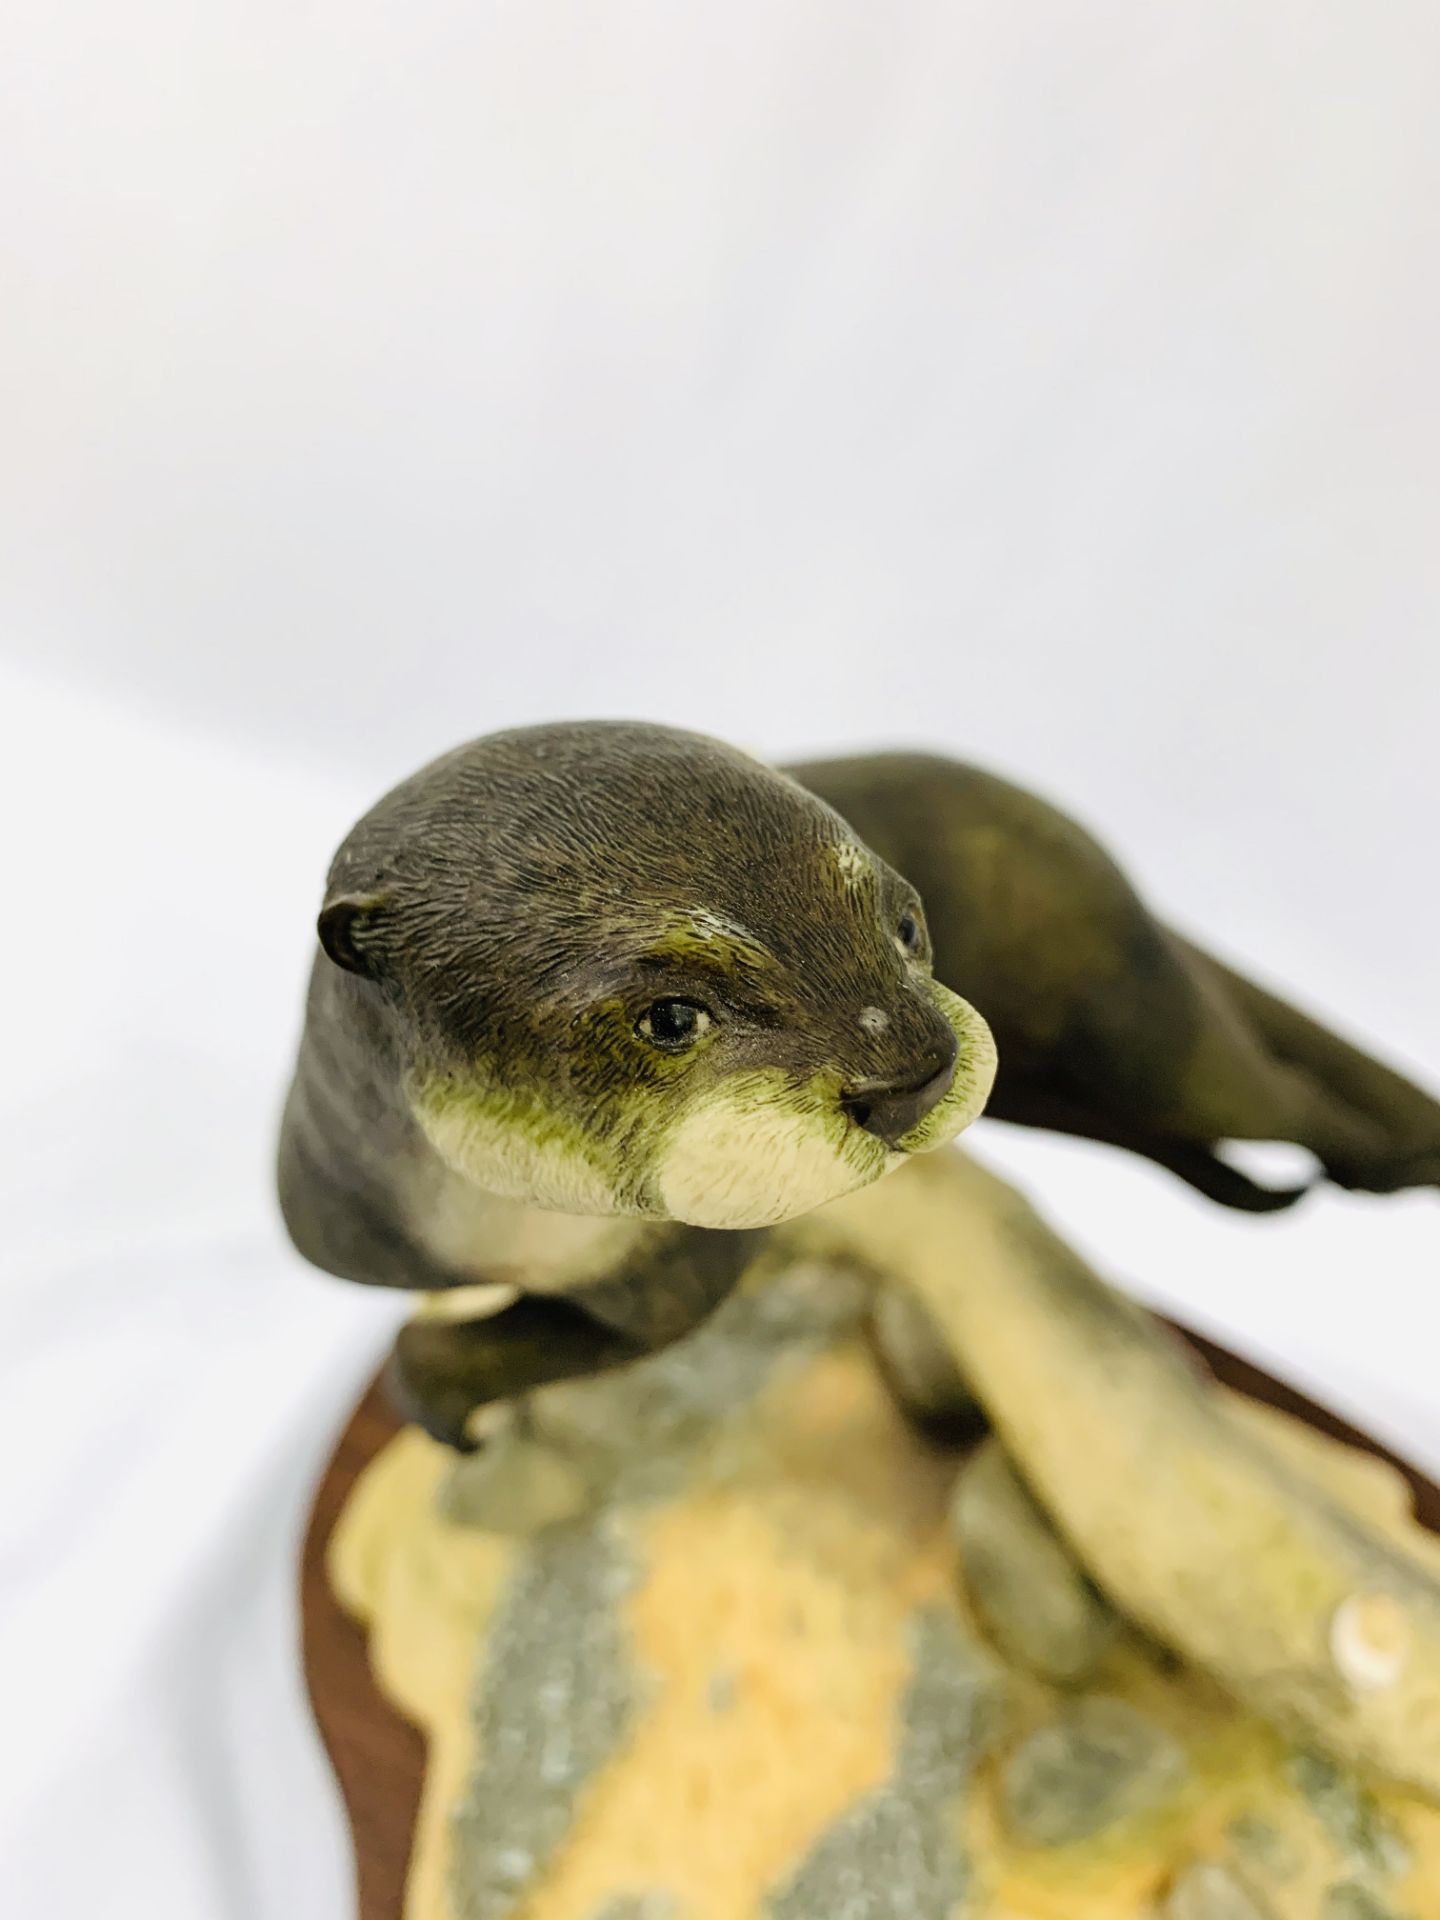 Border Fine Arts Otter figurine by E Waugh, 462/950, dated 1988. - Image 4 of 4